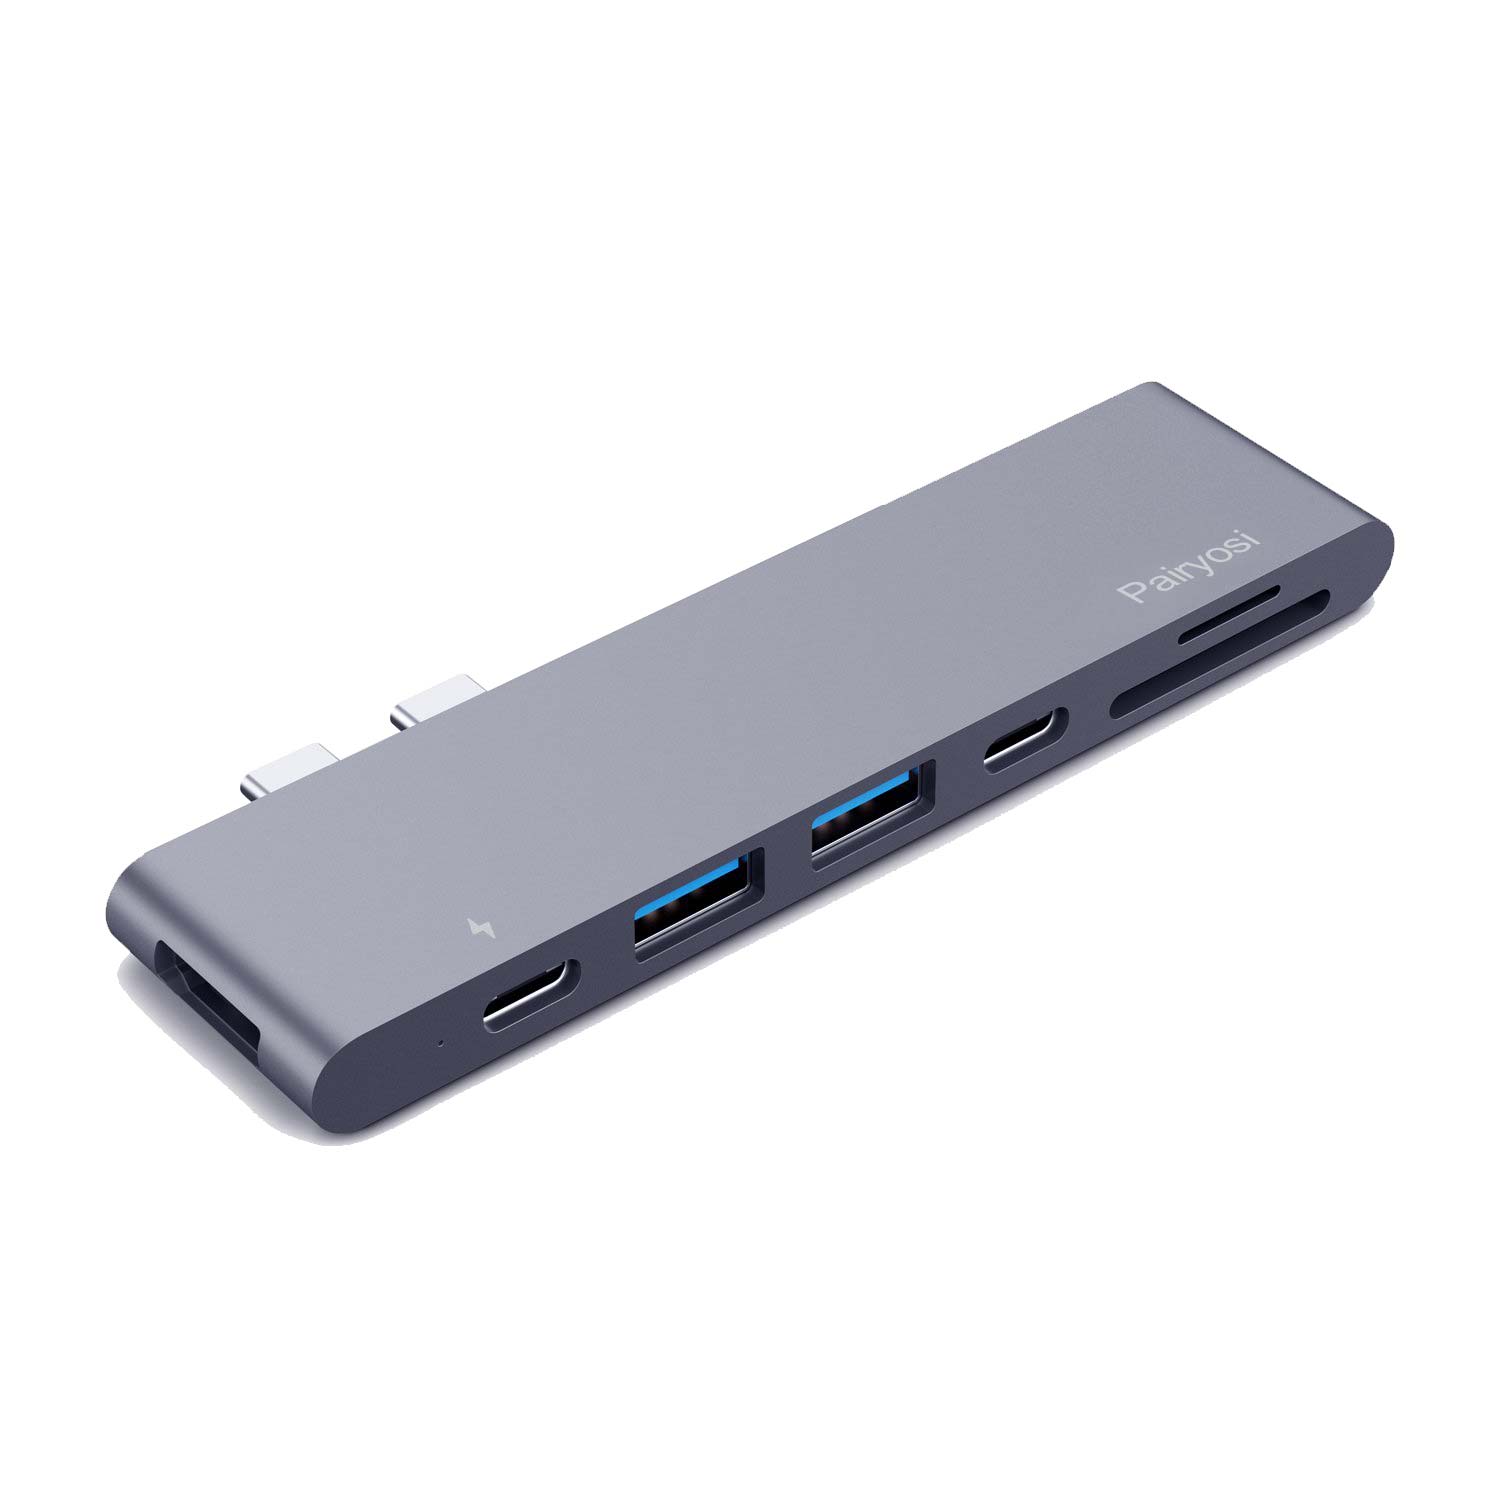 Pairosi 7-in-2 USB C Hub with Multiple Ports (Gray Color)